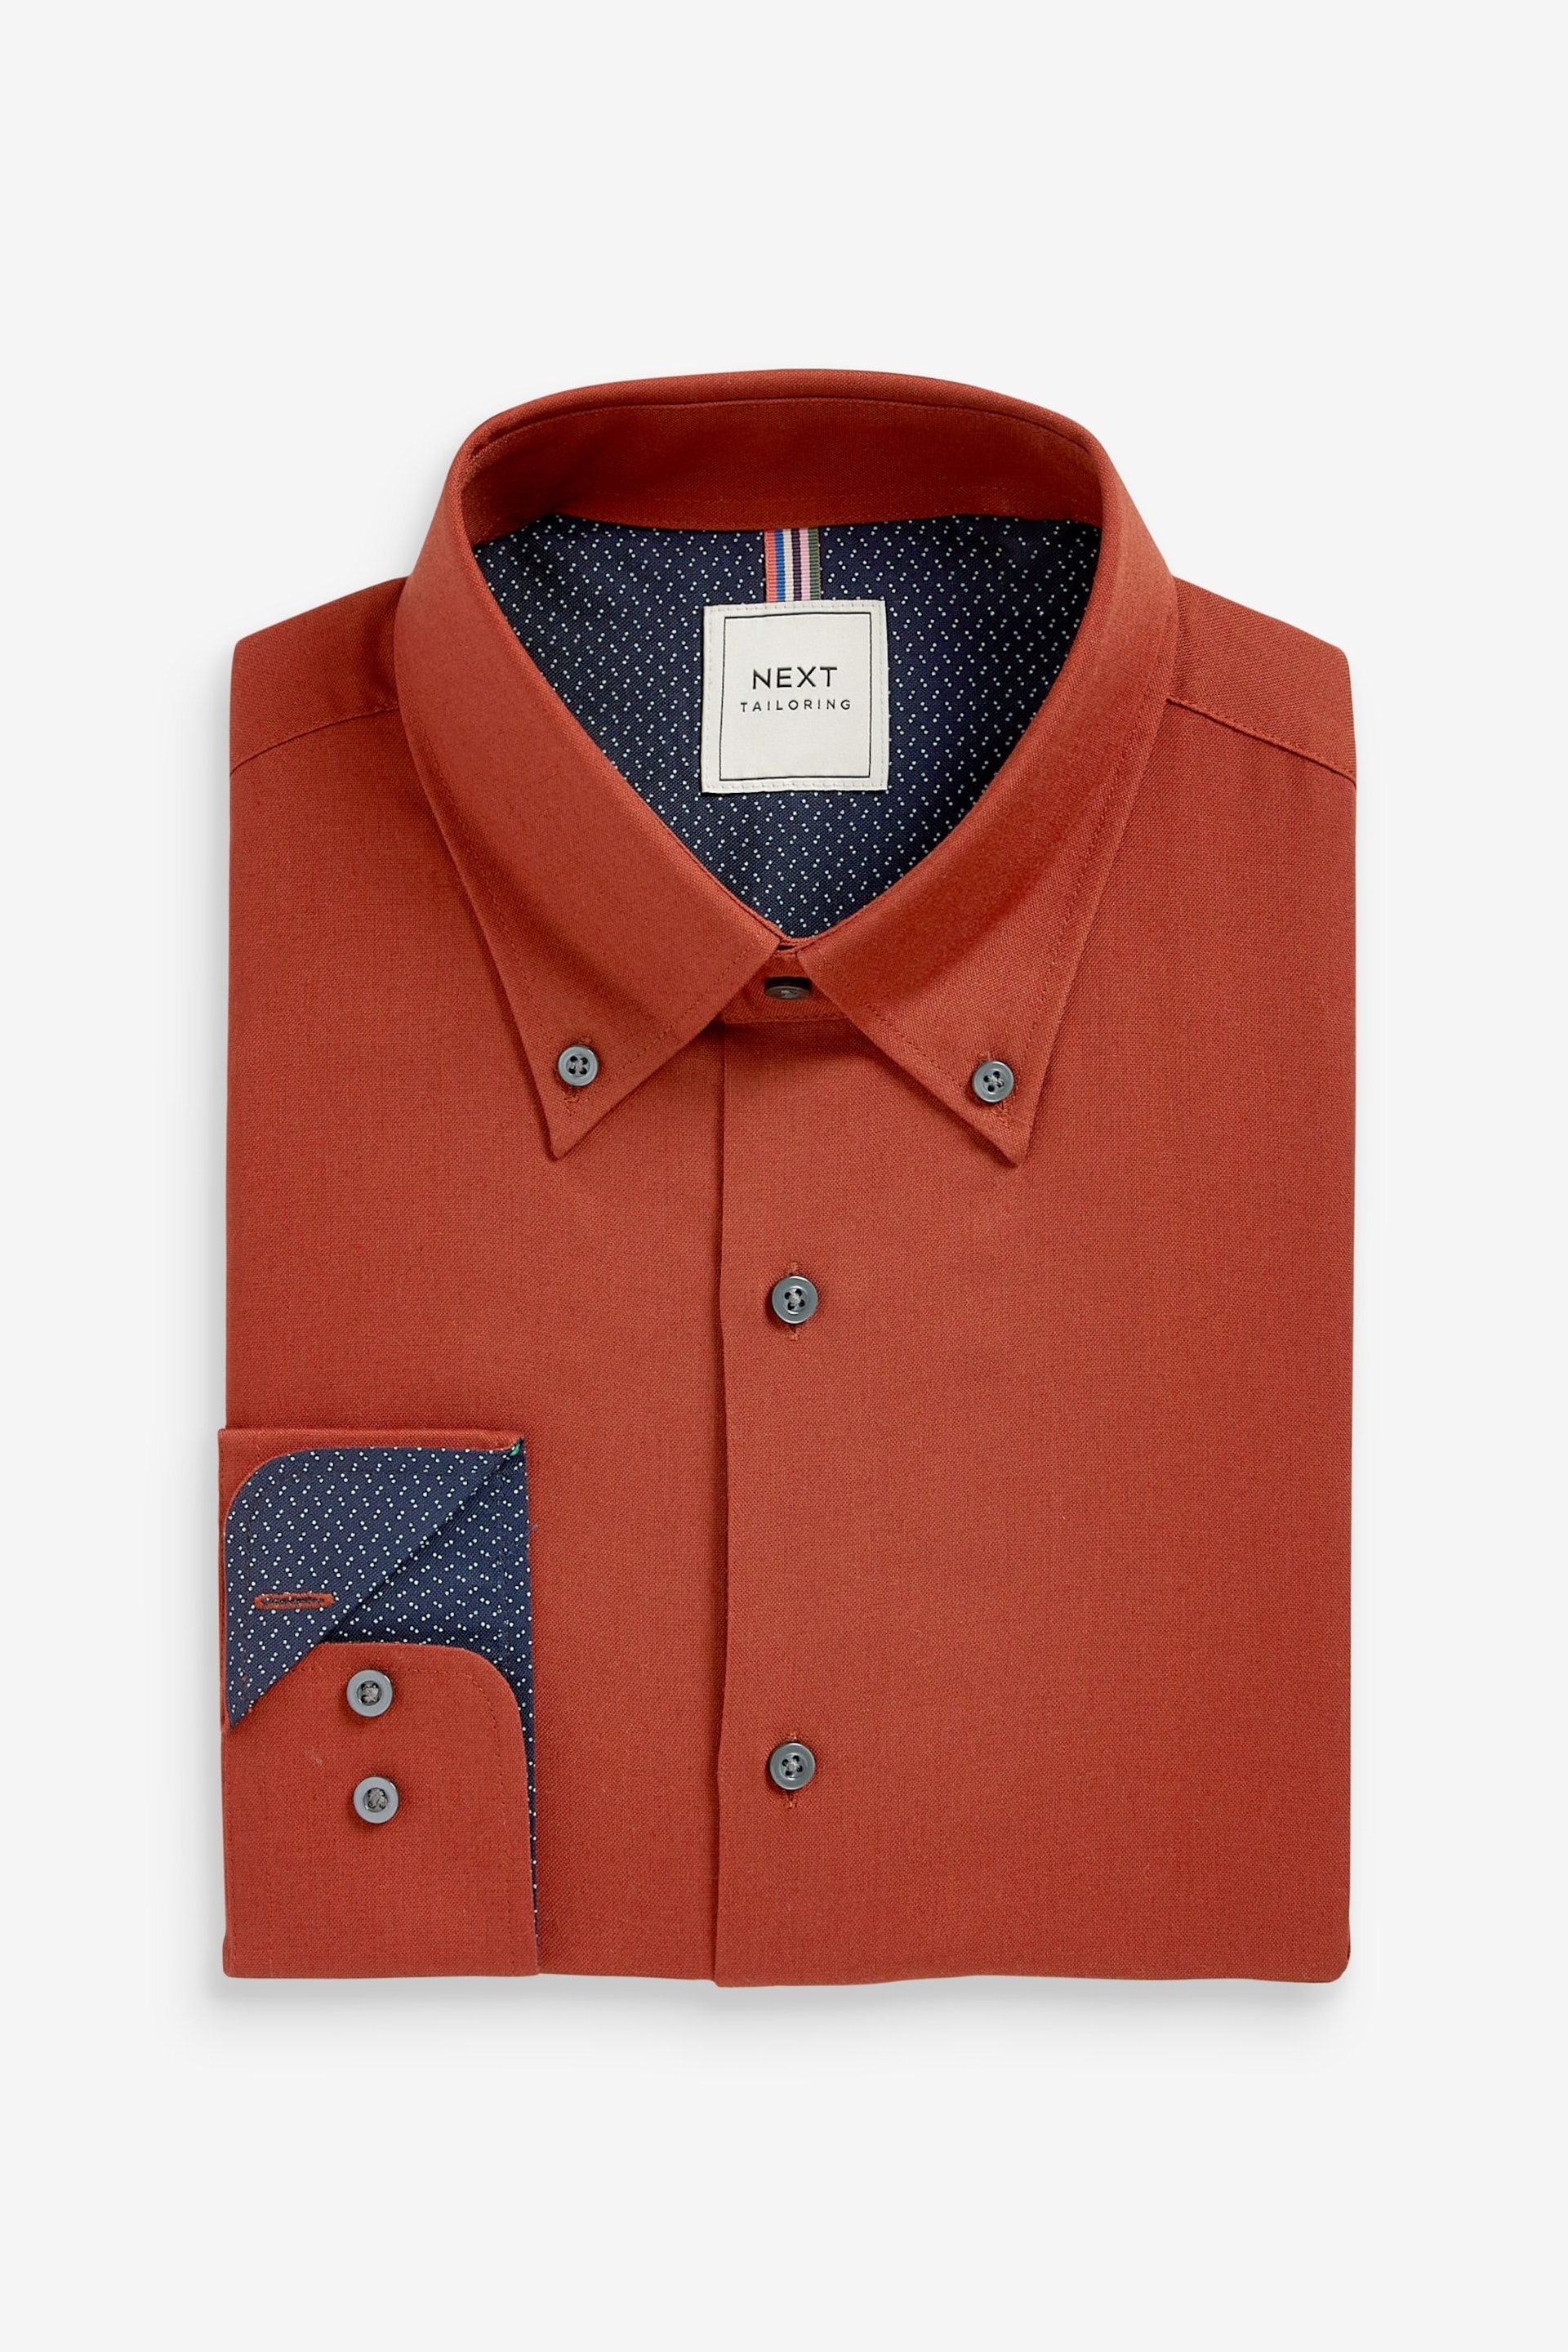 Terracotta Brown Slim Fit Easy Iron Button Down Oxford Shirt - Image 6 of 8